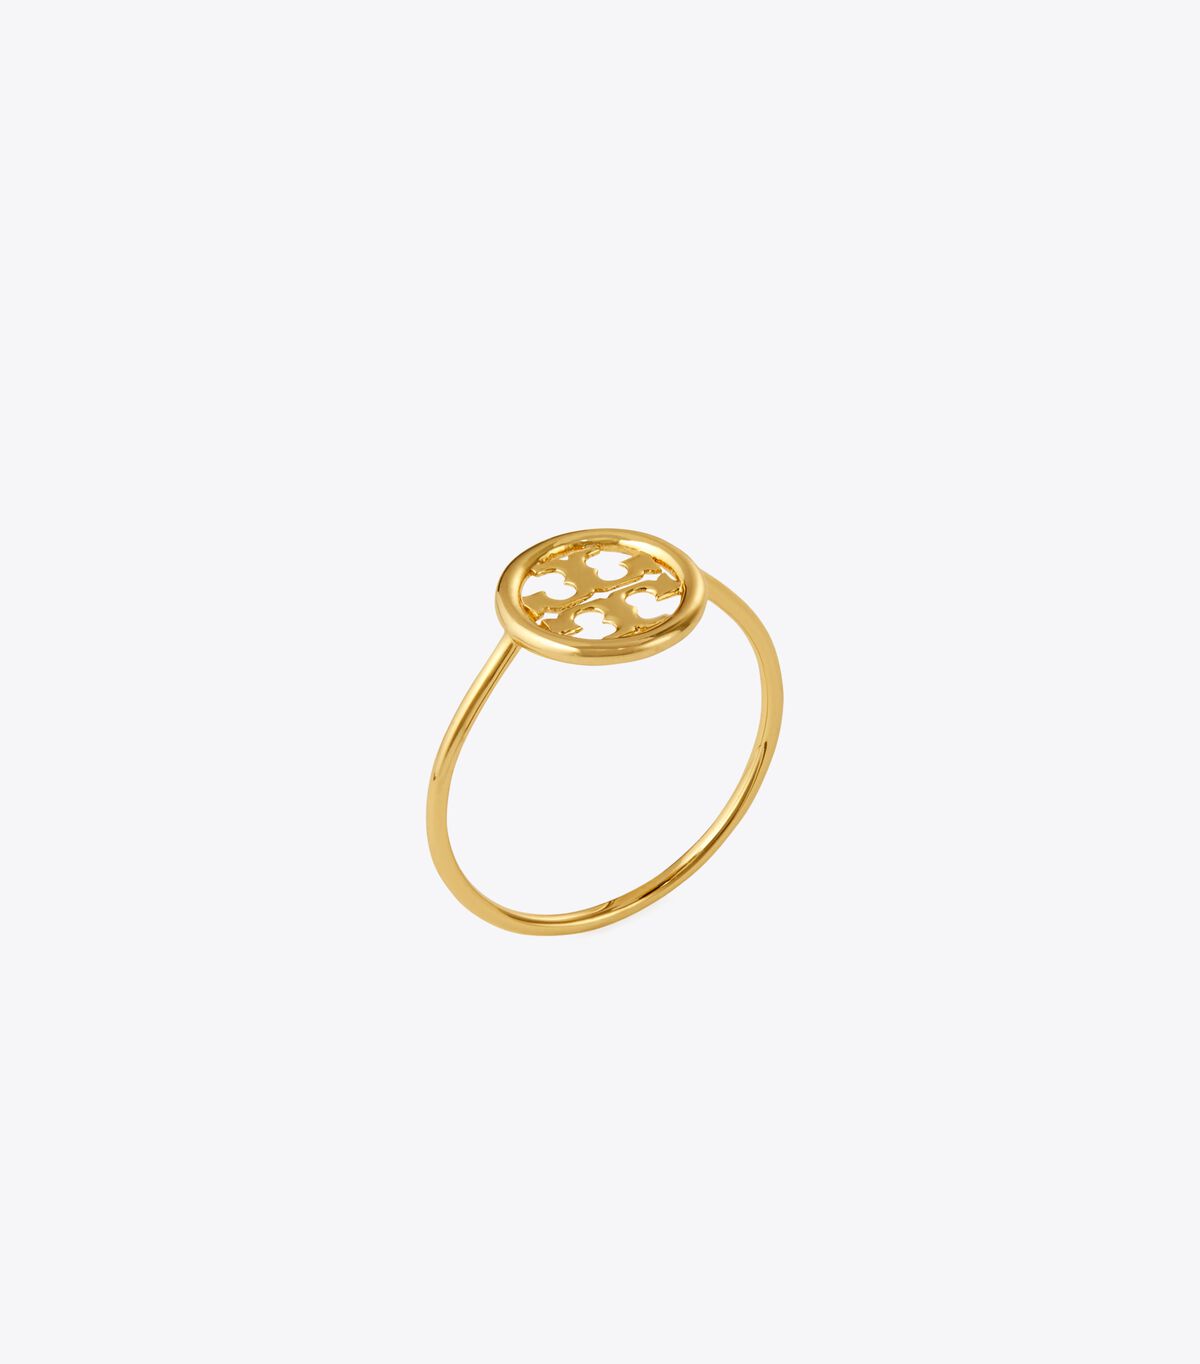 MILER DELICATE RING - TORY GOLD